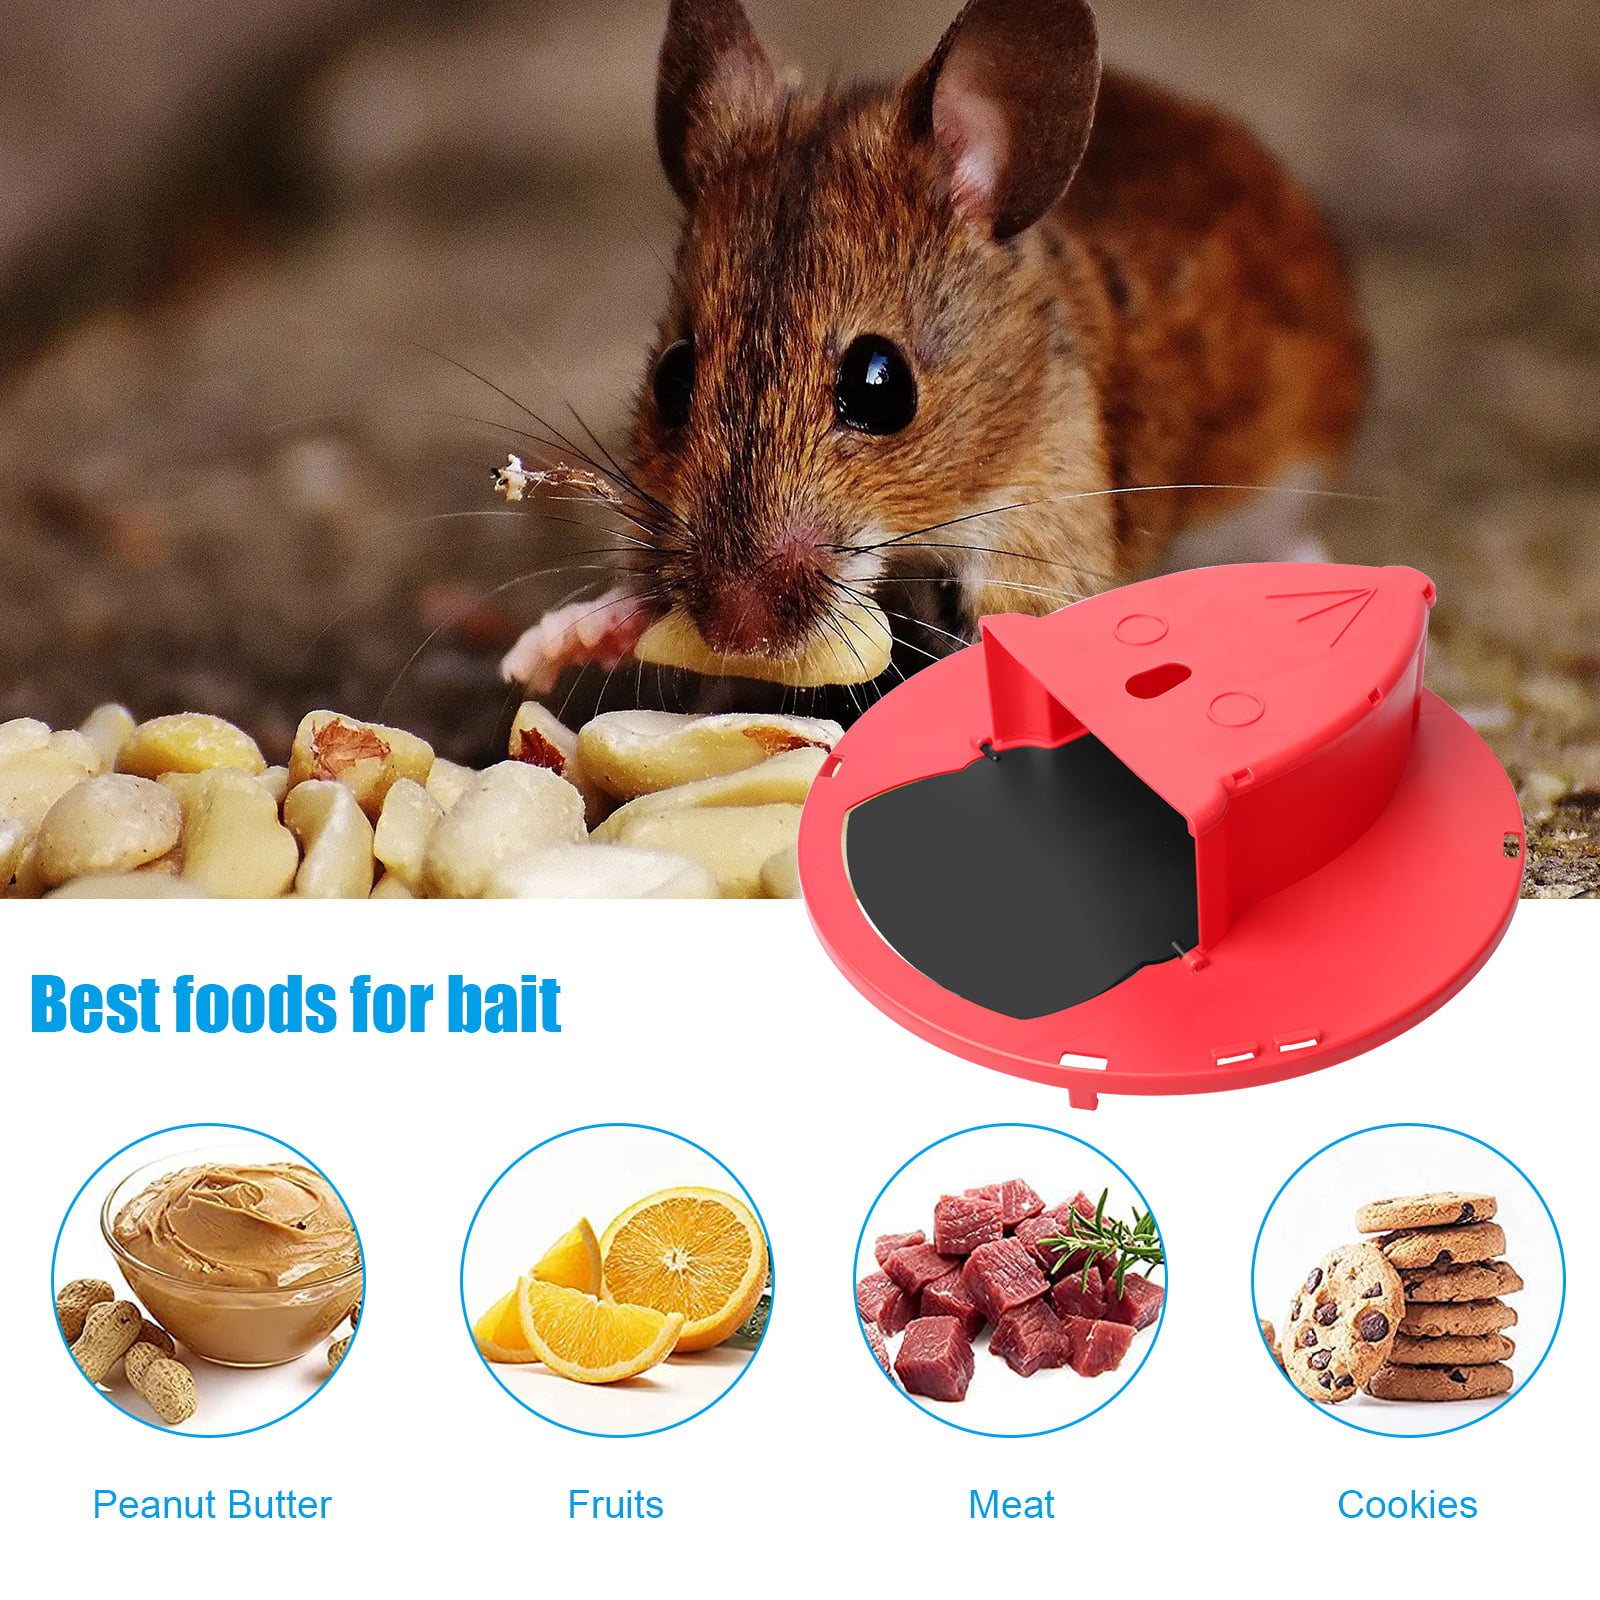 Mouse Rat Trap Bucket, Turnover and Slide Bucket Lid Mouse Rat Trap, for  Indoor Outdoor, Mouse Traps Compatible 5 Gallon Bucket